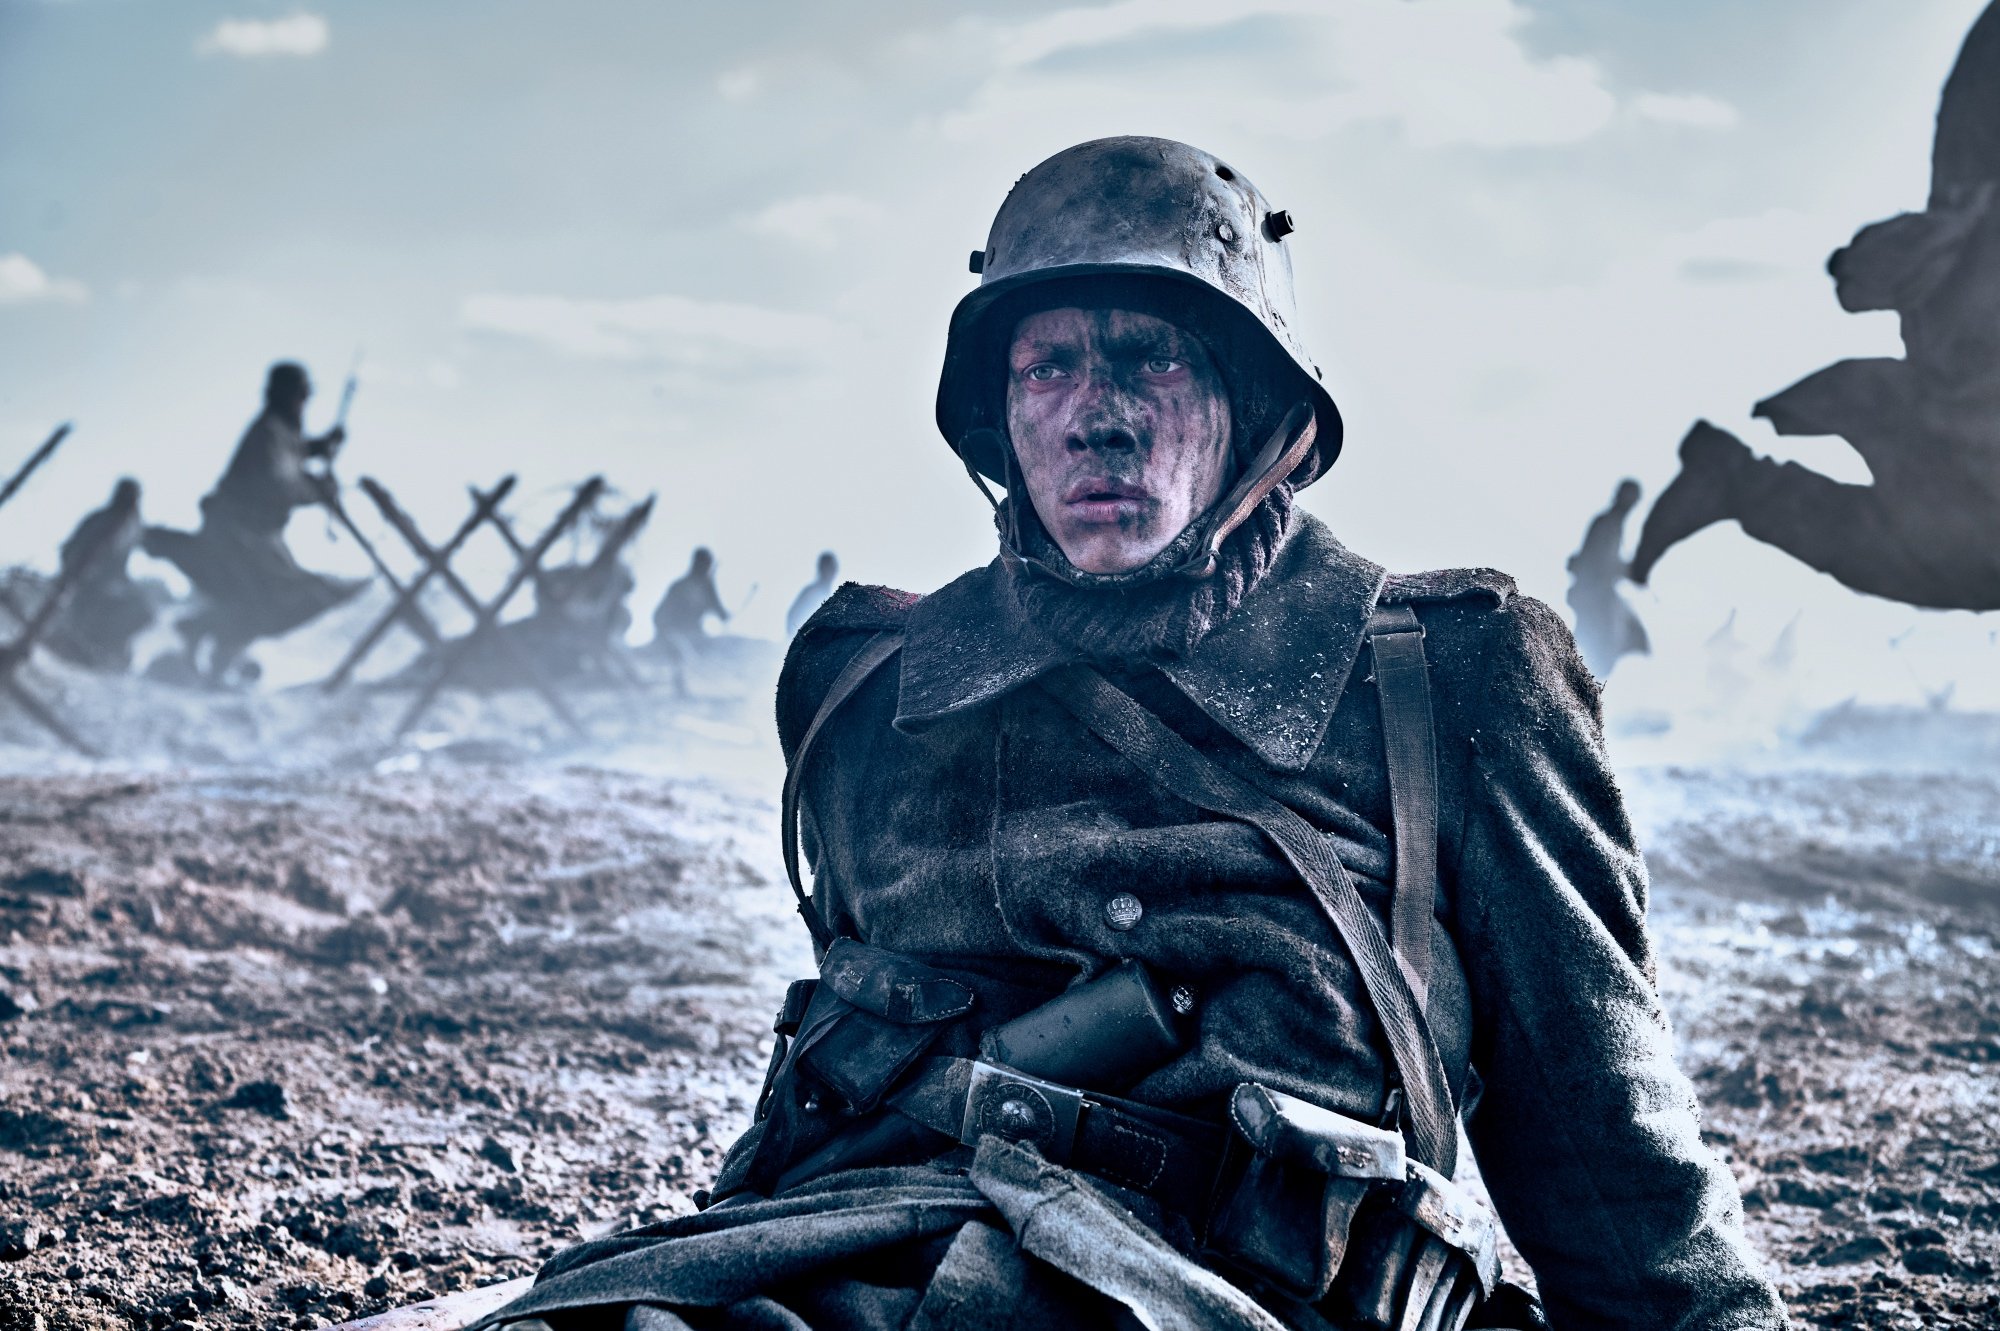 'All Quiet on the Western Front' Felix Kammerer as Paul Bäumer wearing his war uniform, sitting on the battlefield looking in terror with his face covered in mud. Other soldiers running in the background.